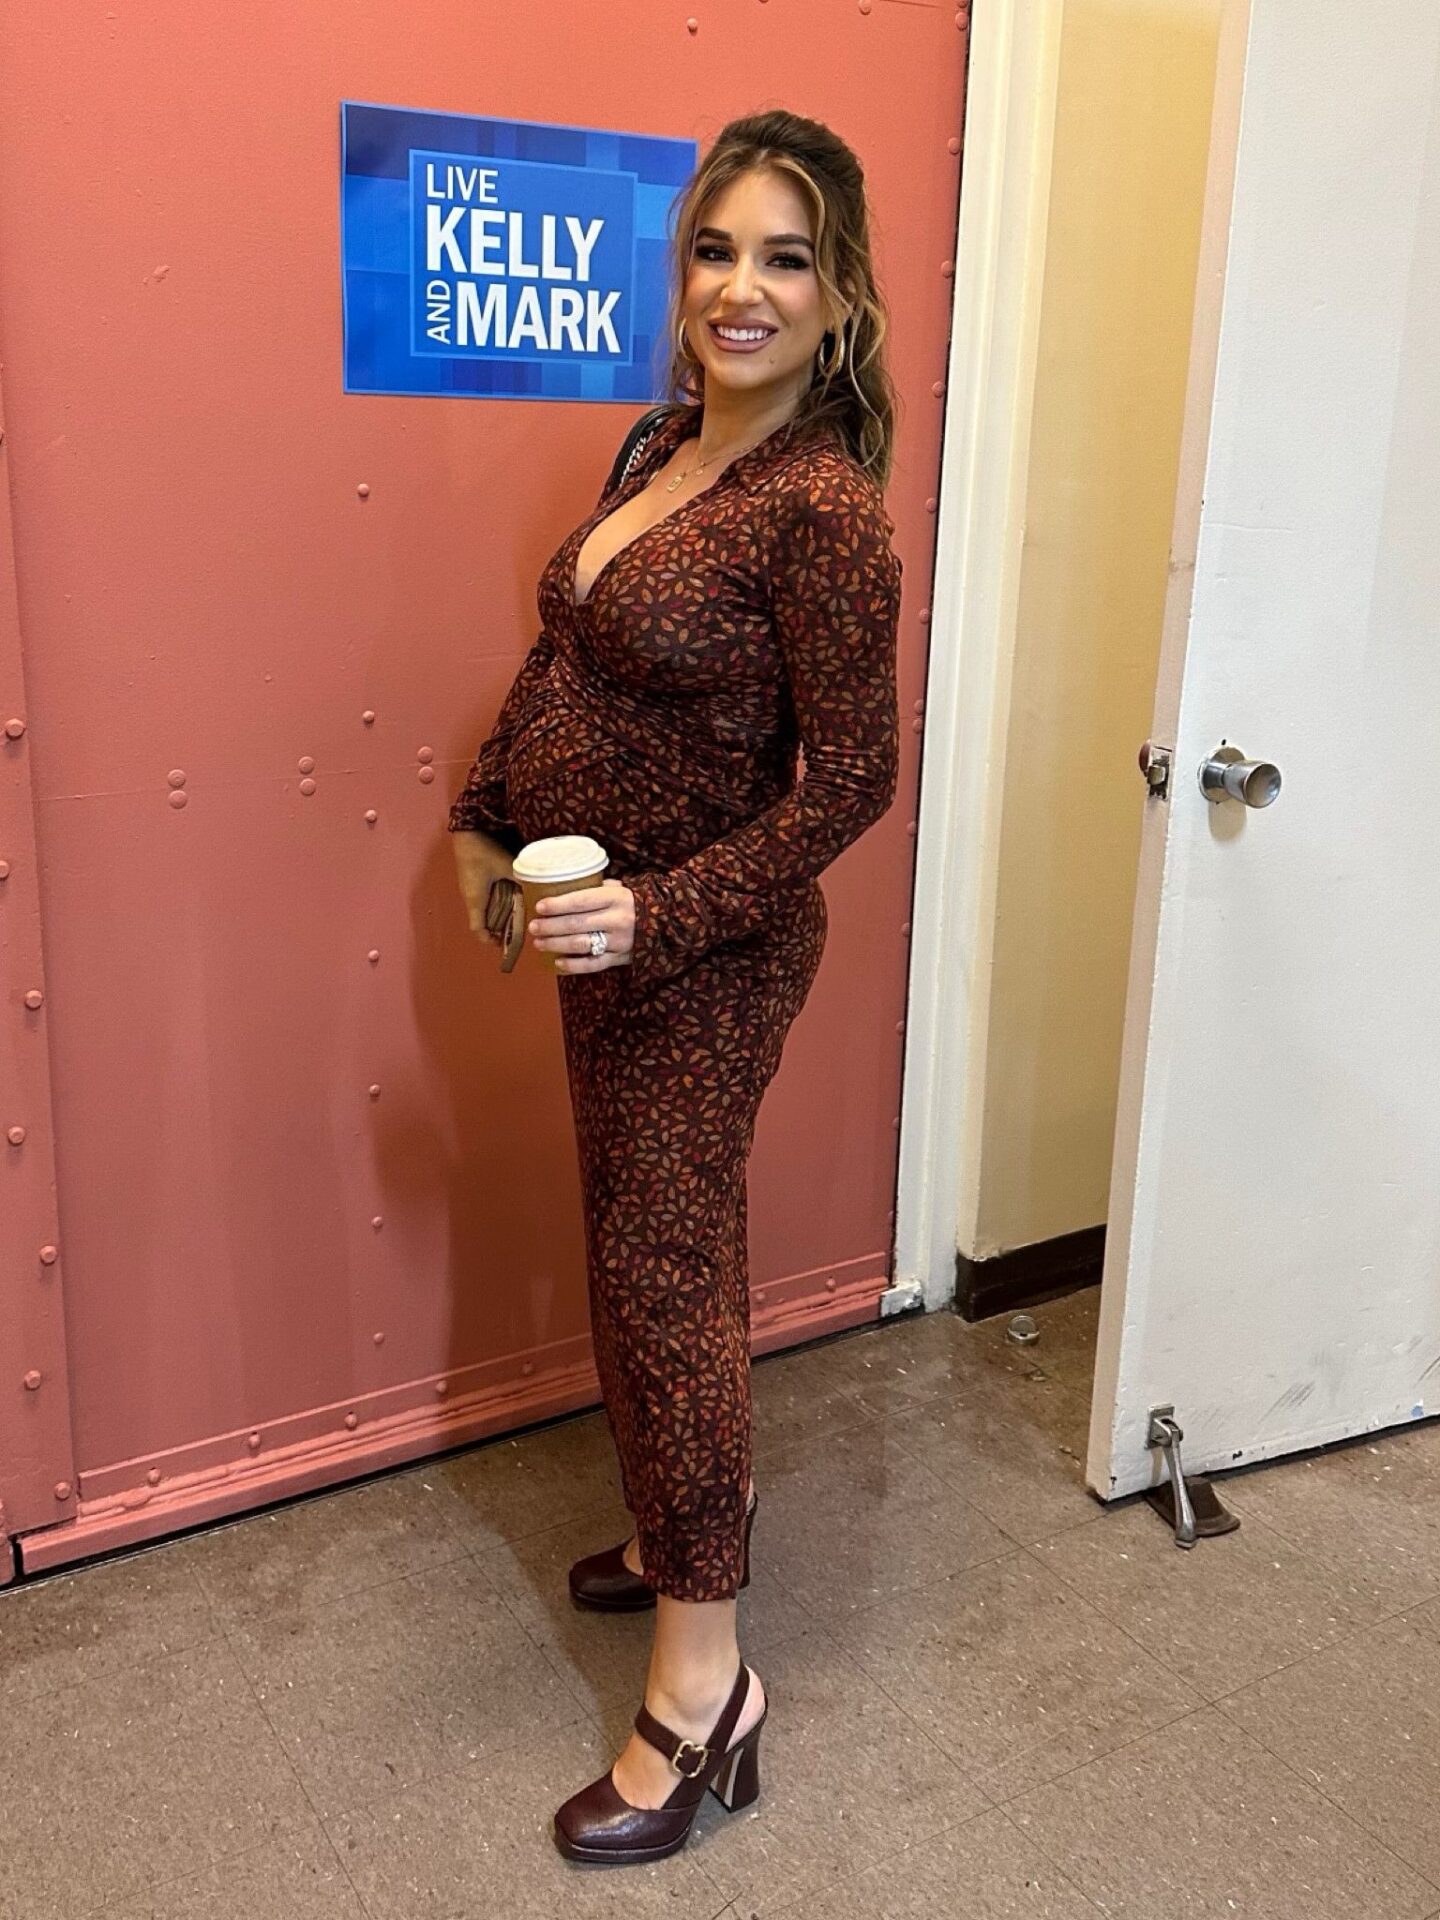 Jessie James Decker – Live with Kelly and Mark